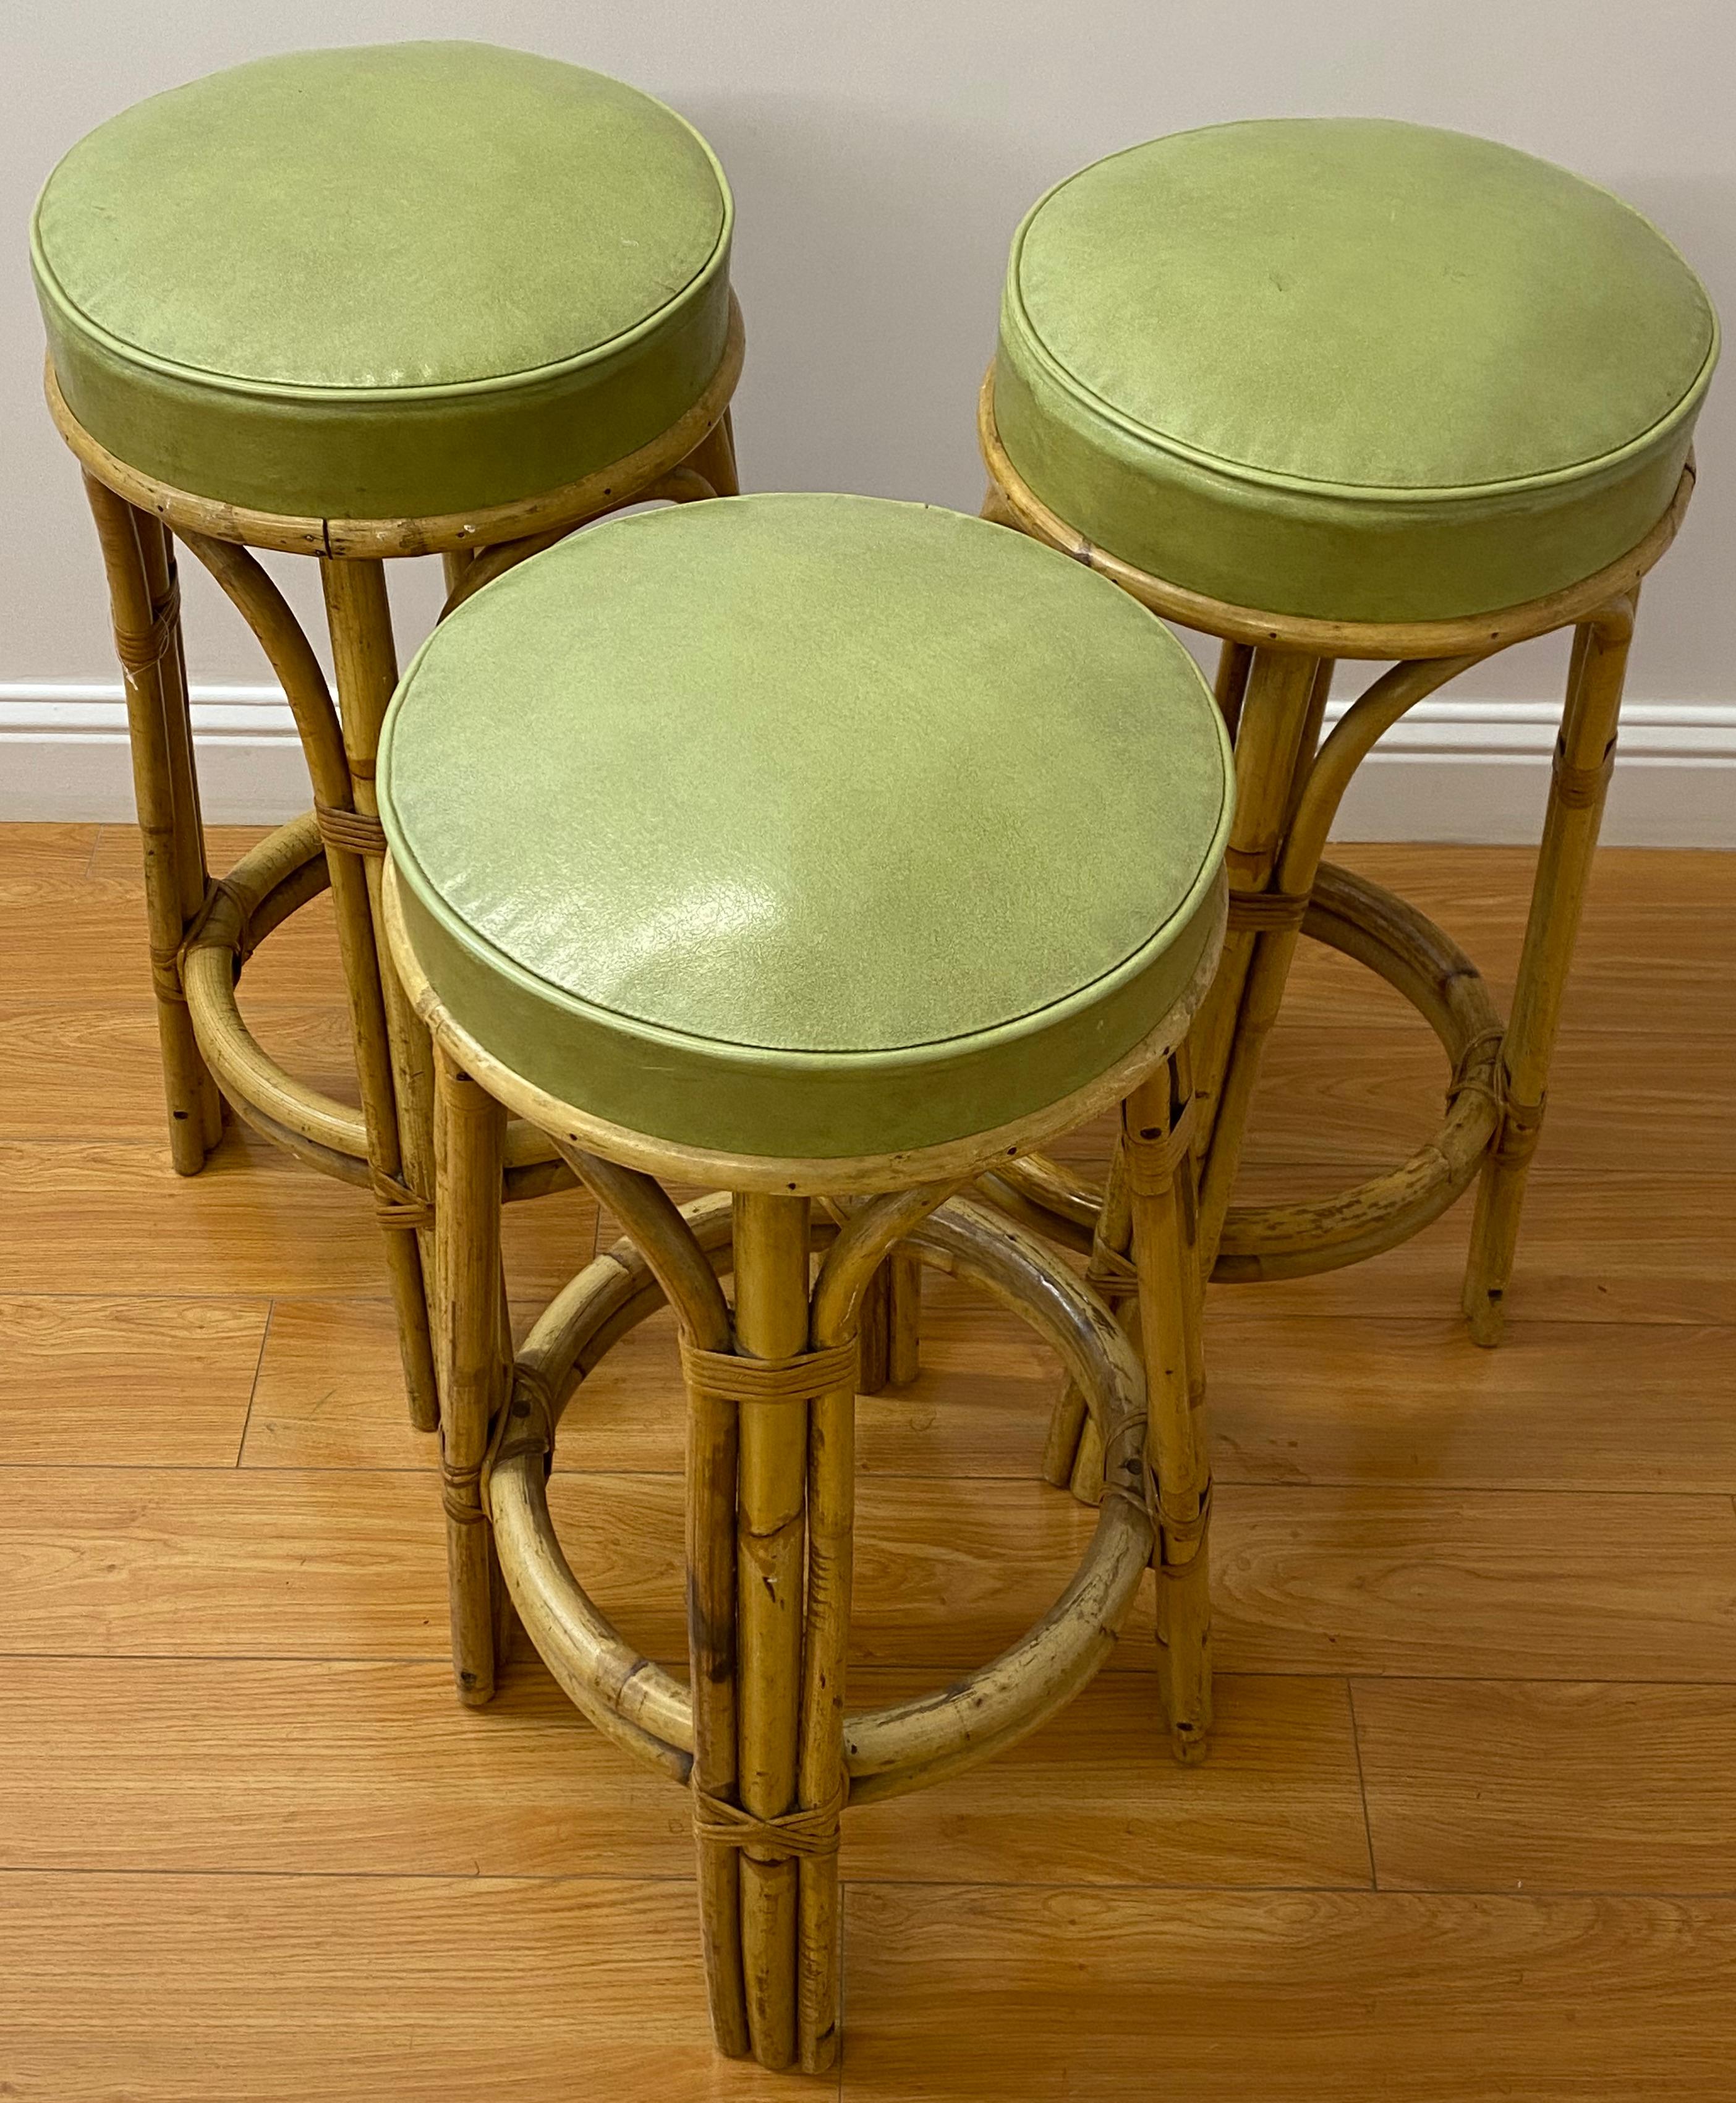 Set of three vintage bamboo & olive green leather bar stools C.1950

Handsome set of three vintage bar stools made from bamboo and covered with a nice olive green leather.

Each stool measures 18